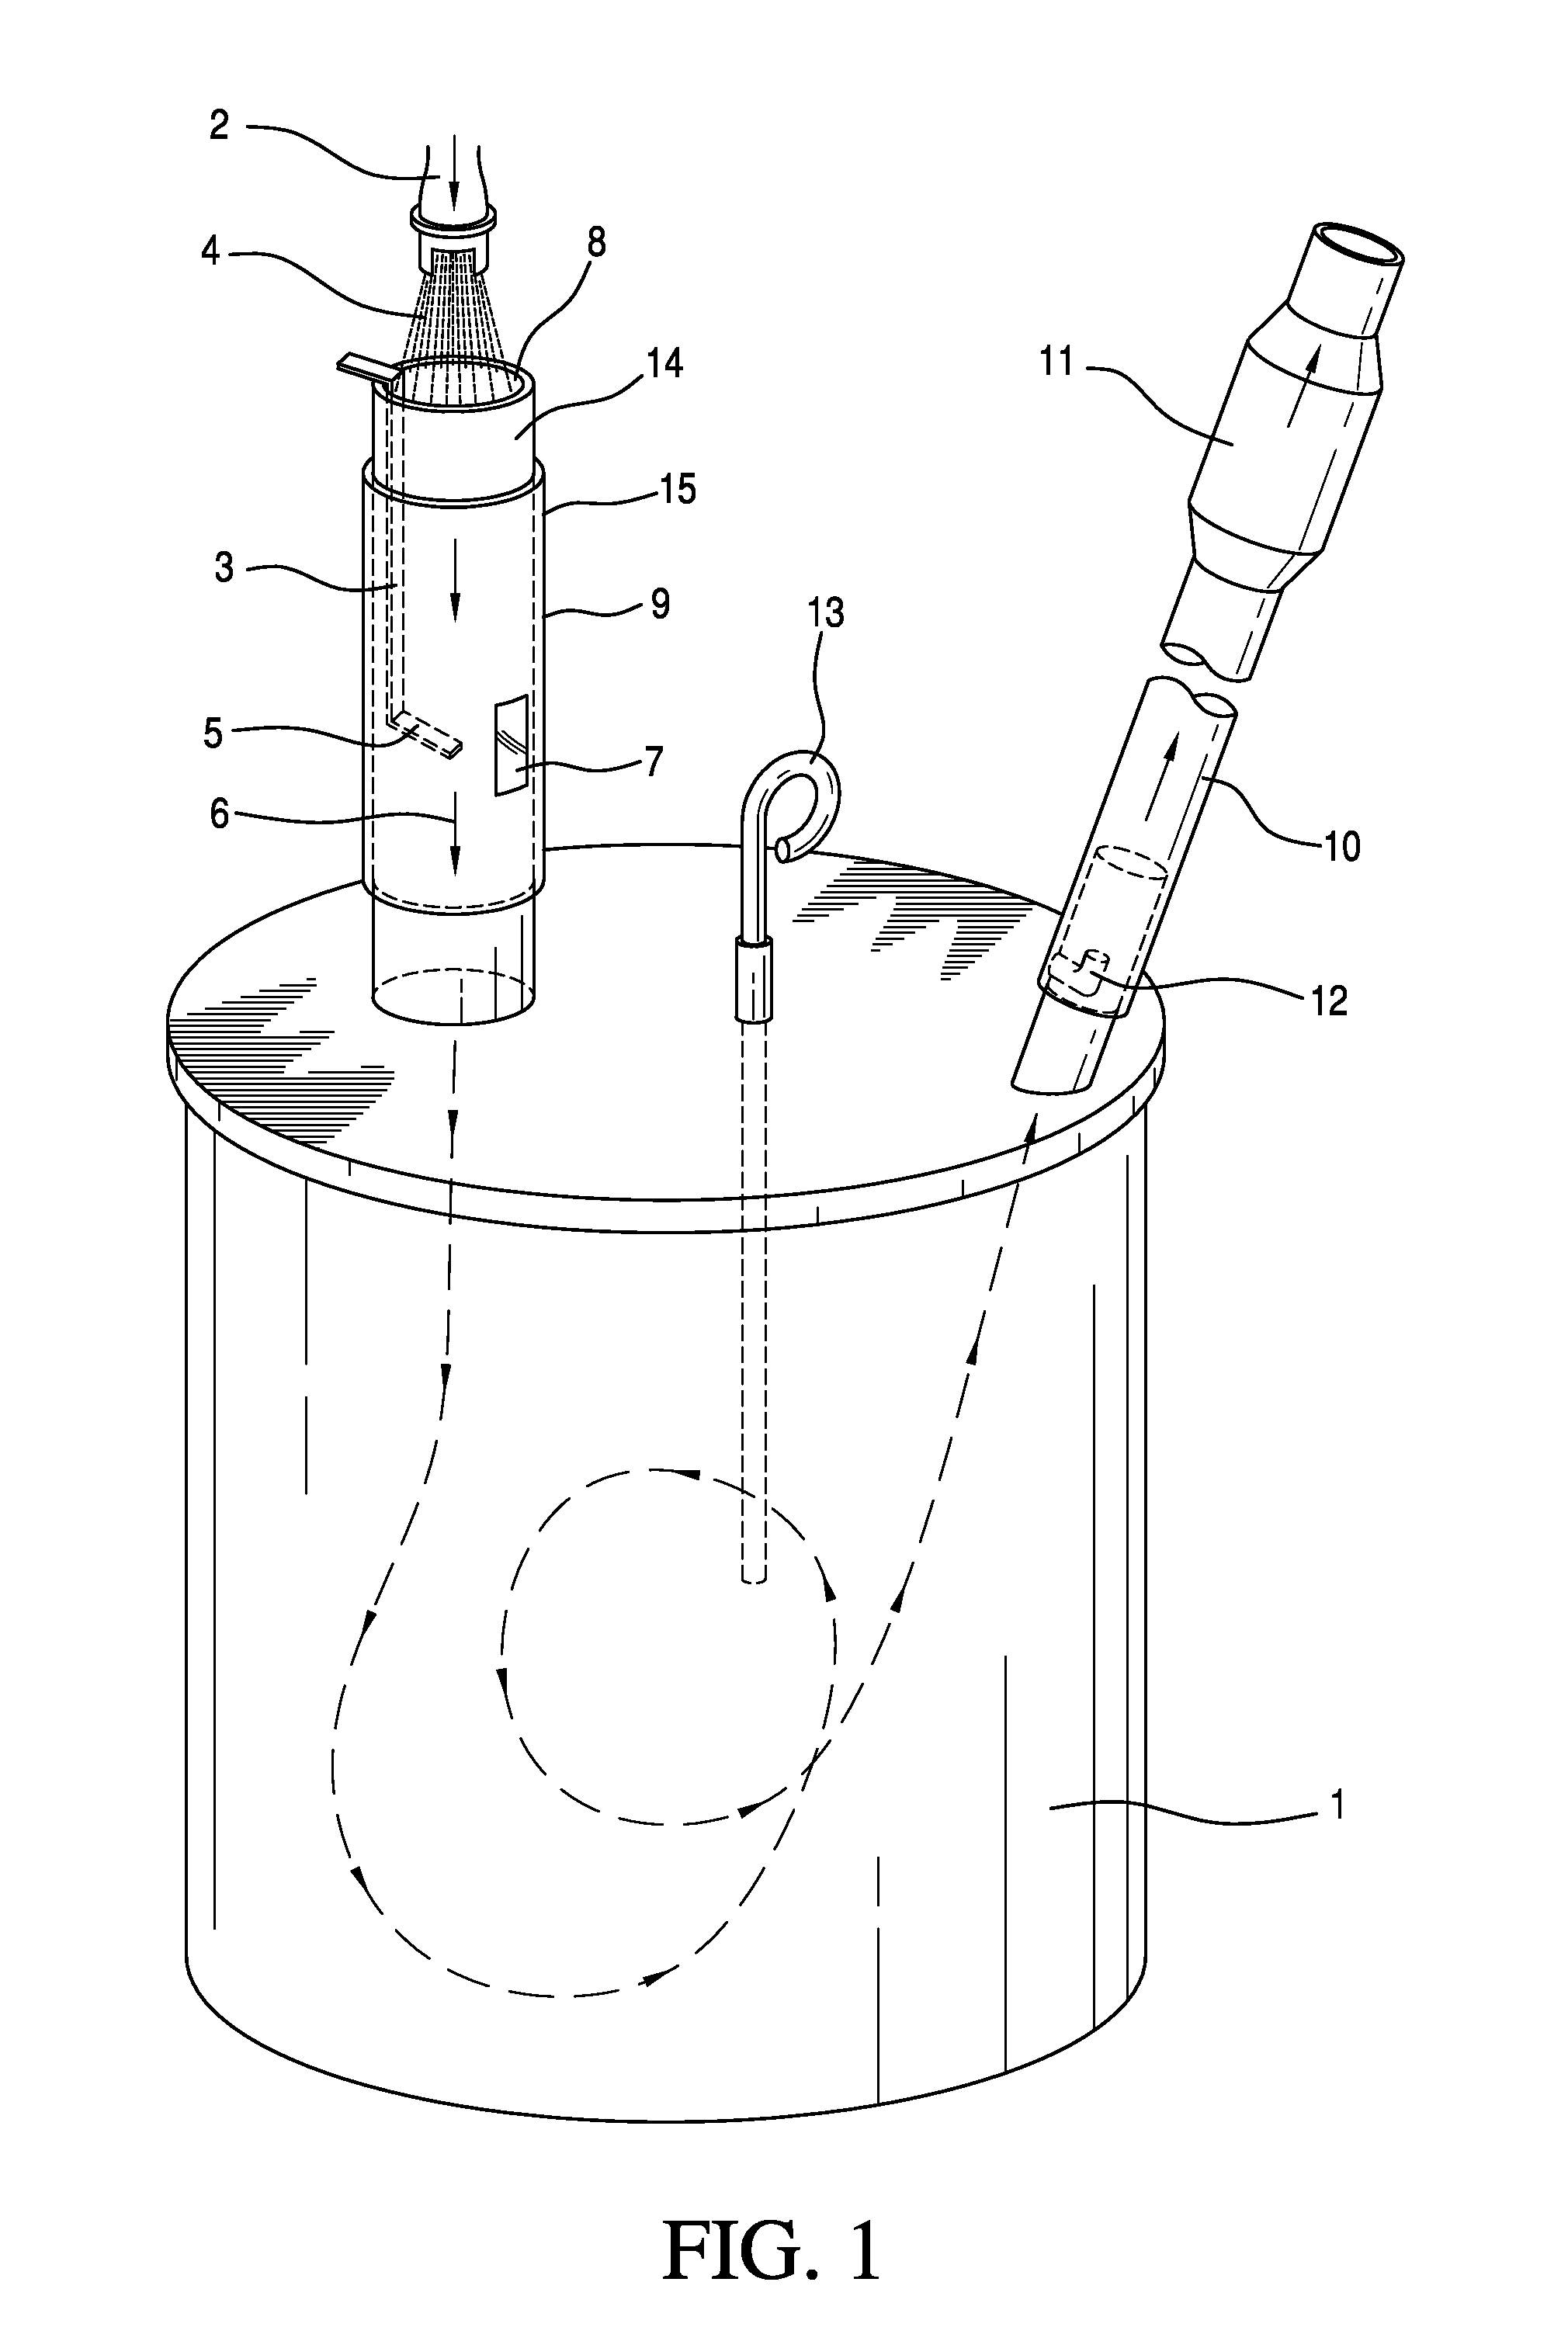 Device for collecting paint, lacquer and adhesive residues out of paint, lacquer, and adhesive guns, particularly guns connectable to a hose